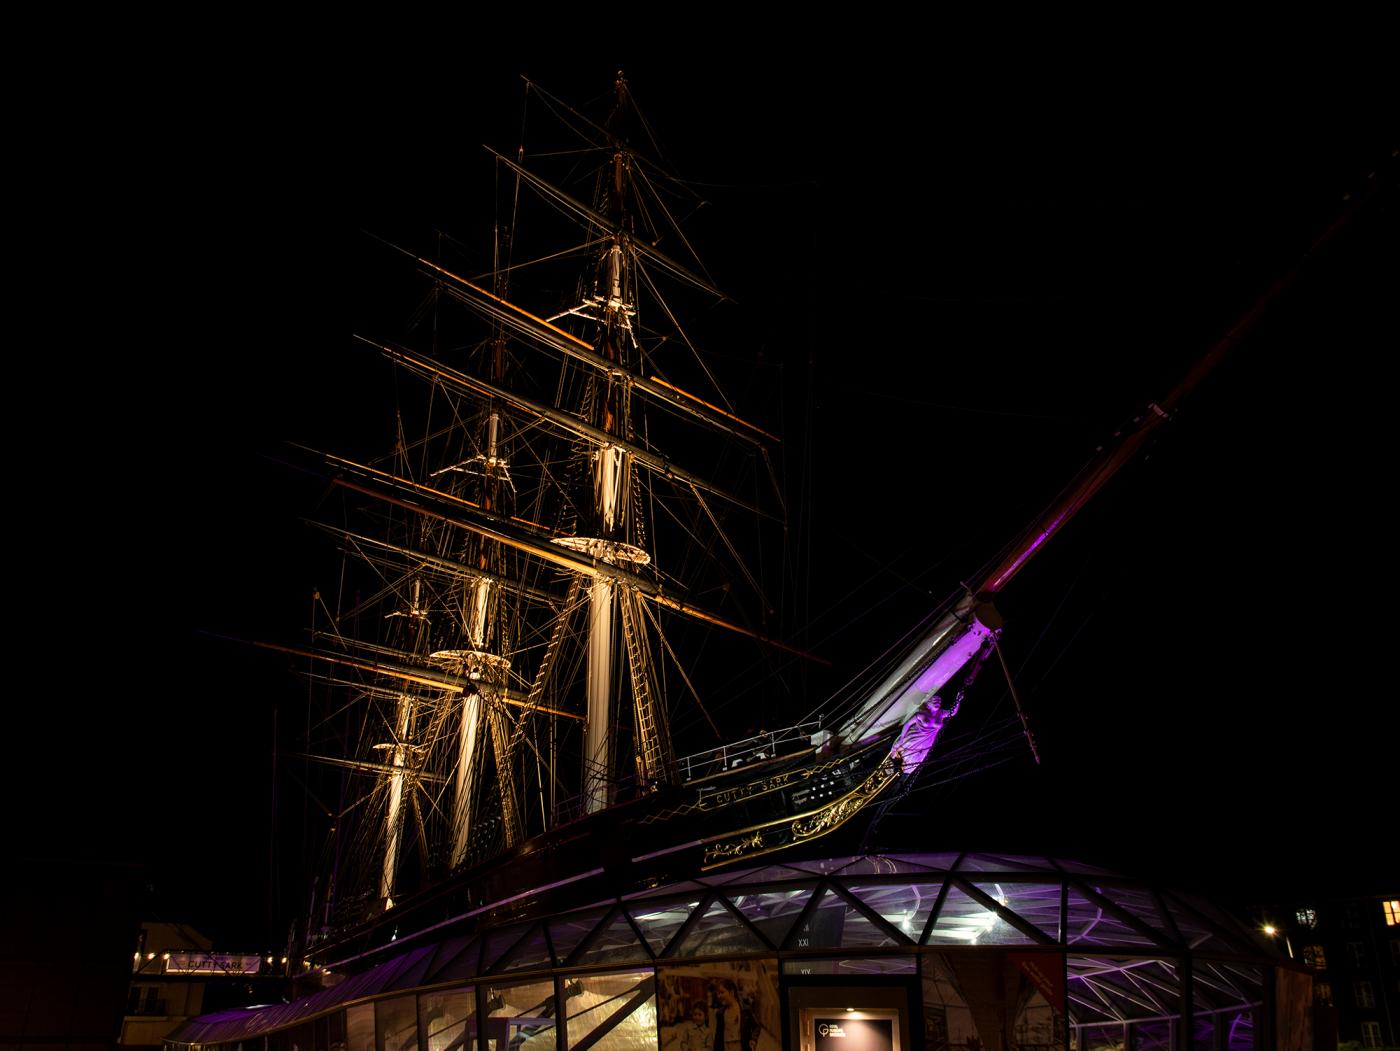 An image showing 'Cutty Sark'